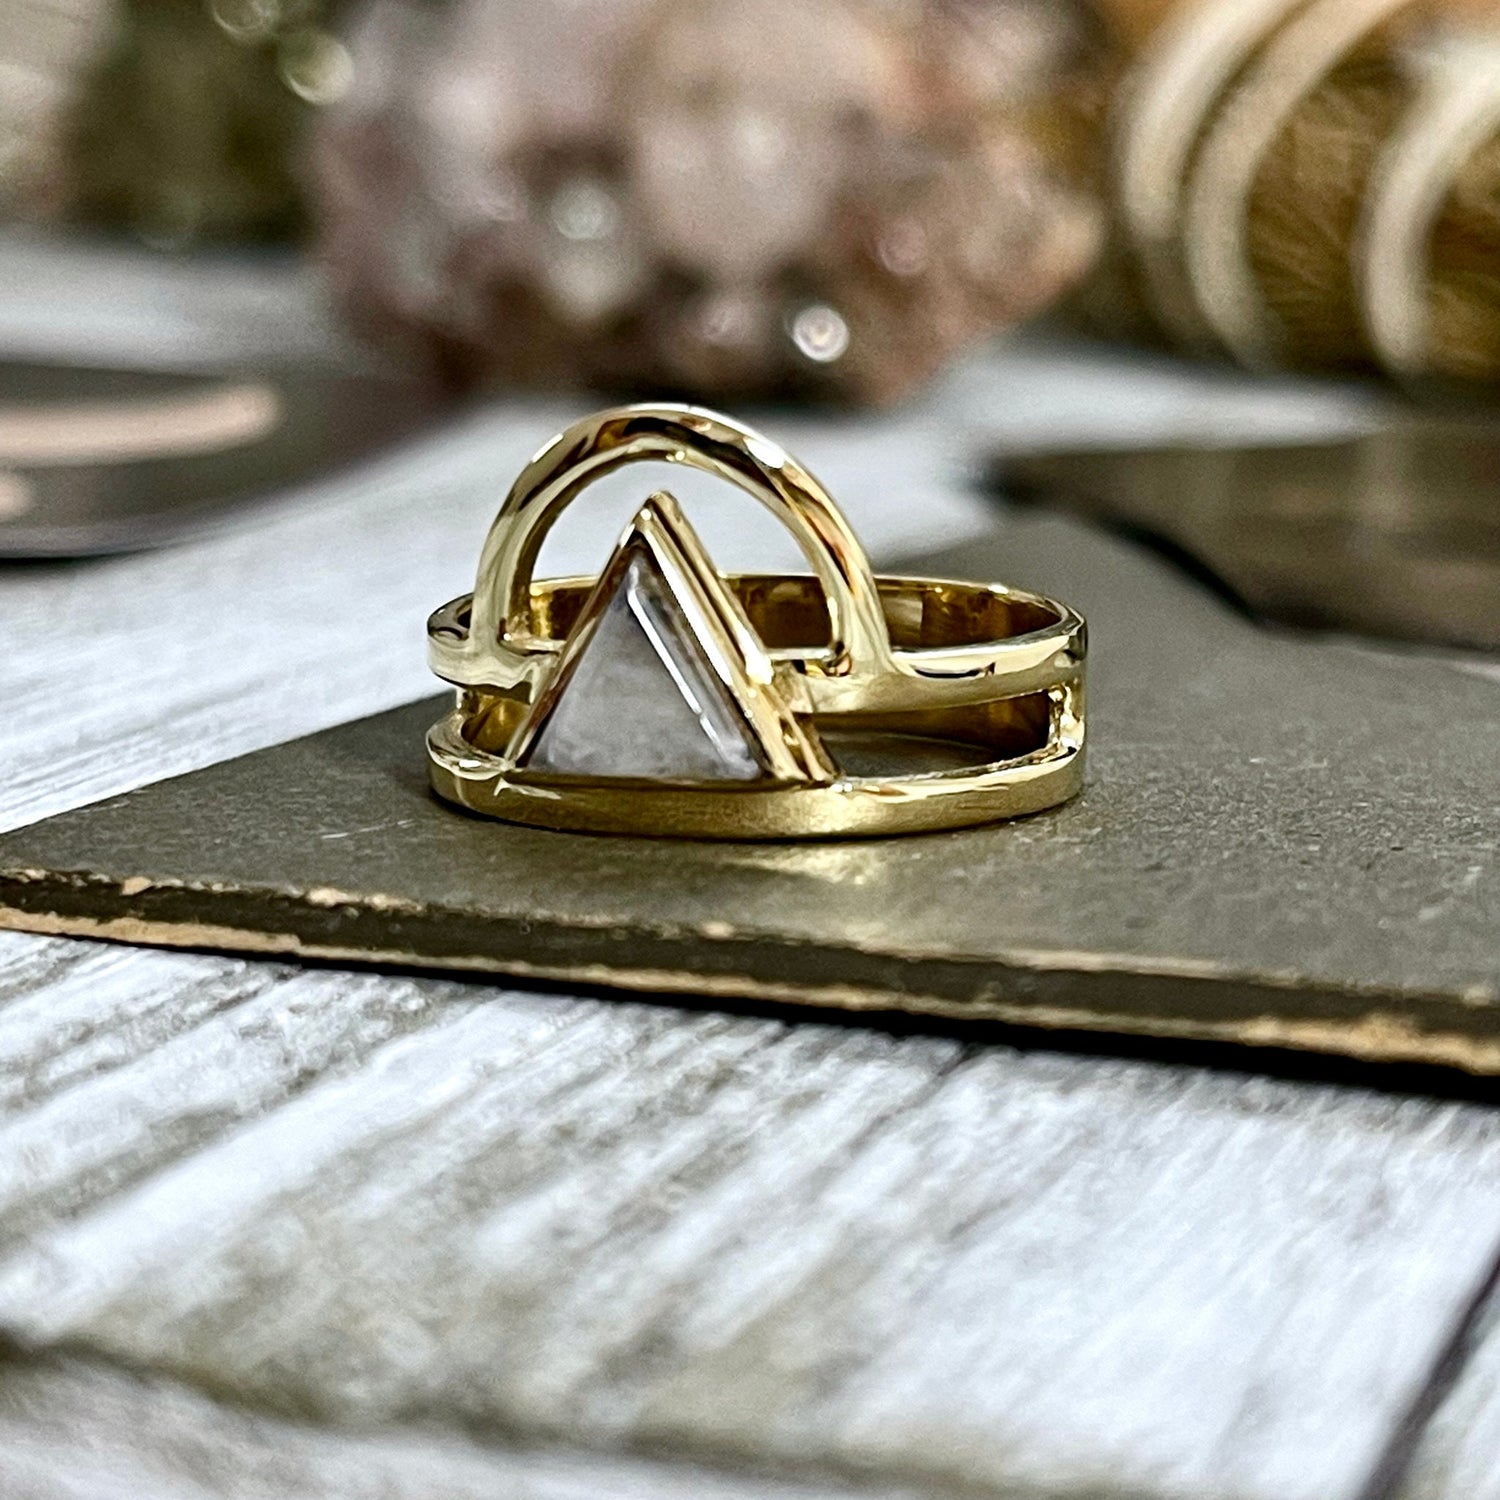 Accessories, Bohemian Ring, Boho Jewelry, Boho Ring, Crystal Ring, Curated- Rings, Etsy Id 1212029929, Etsy ID: 1350095507, Festival Jewelry, Gypsy Ring, Jewelry, Large Crystal, Rainbow Moonstone, Rings, Statement Rings